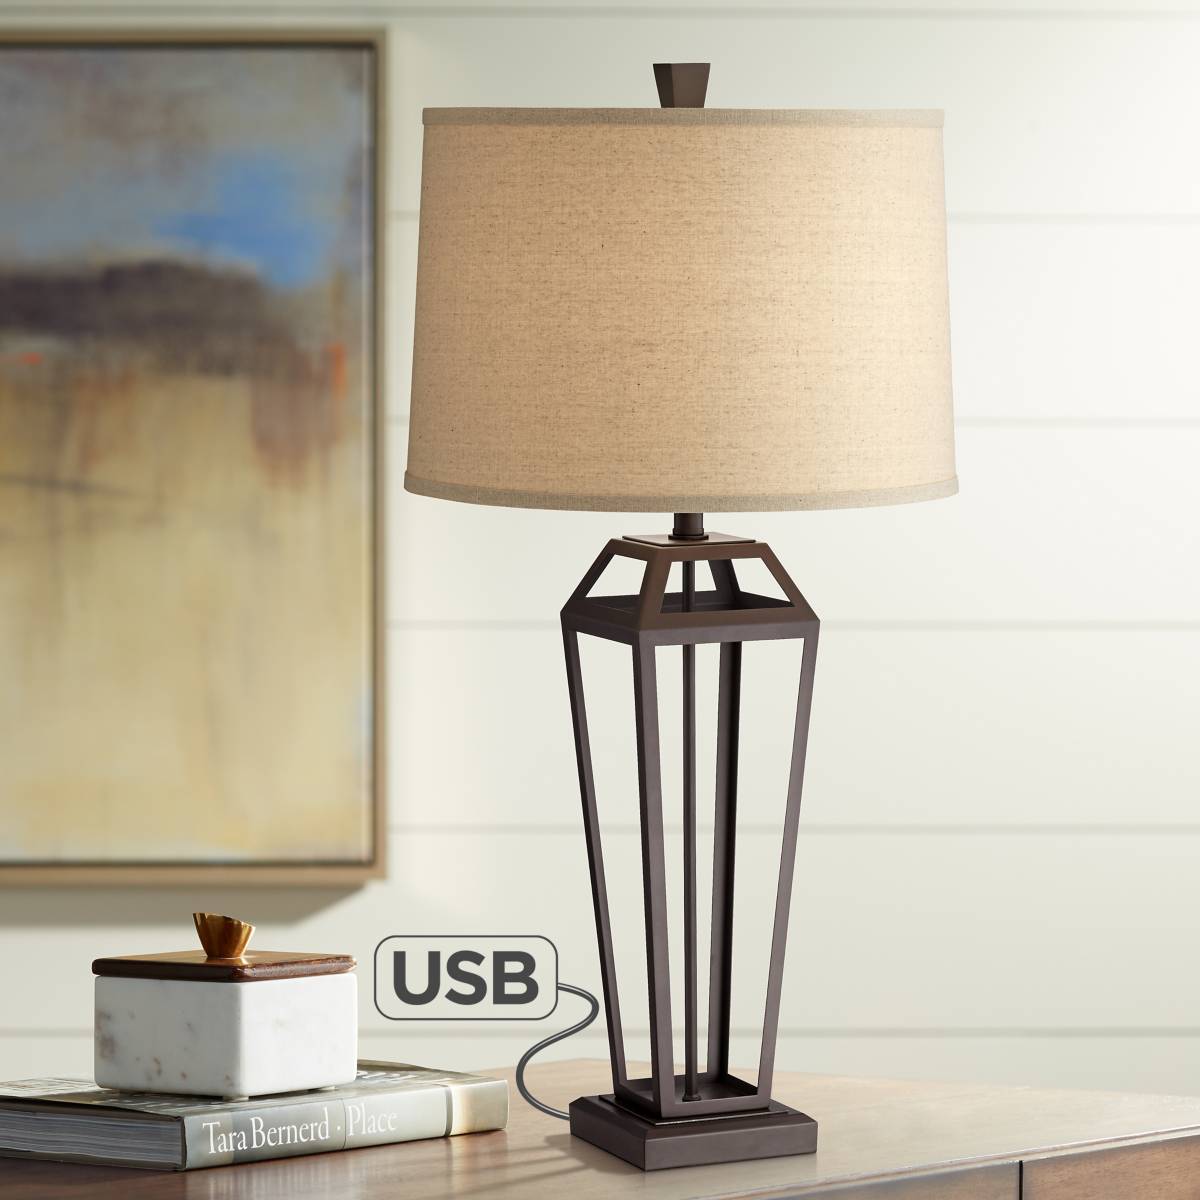 31 In. - 35 In., Usb, Table Lamps | Lamps Plus